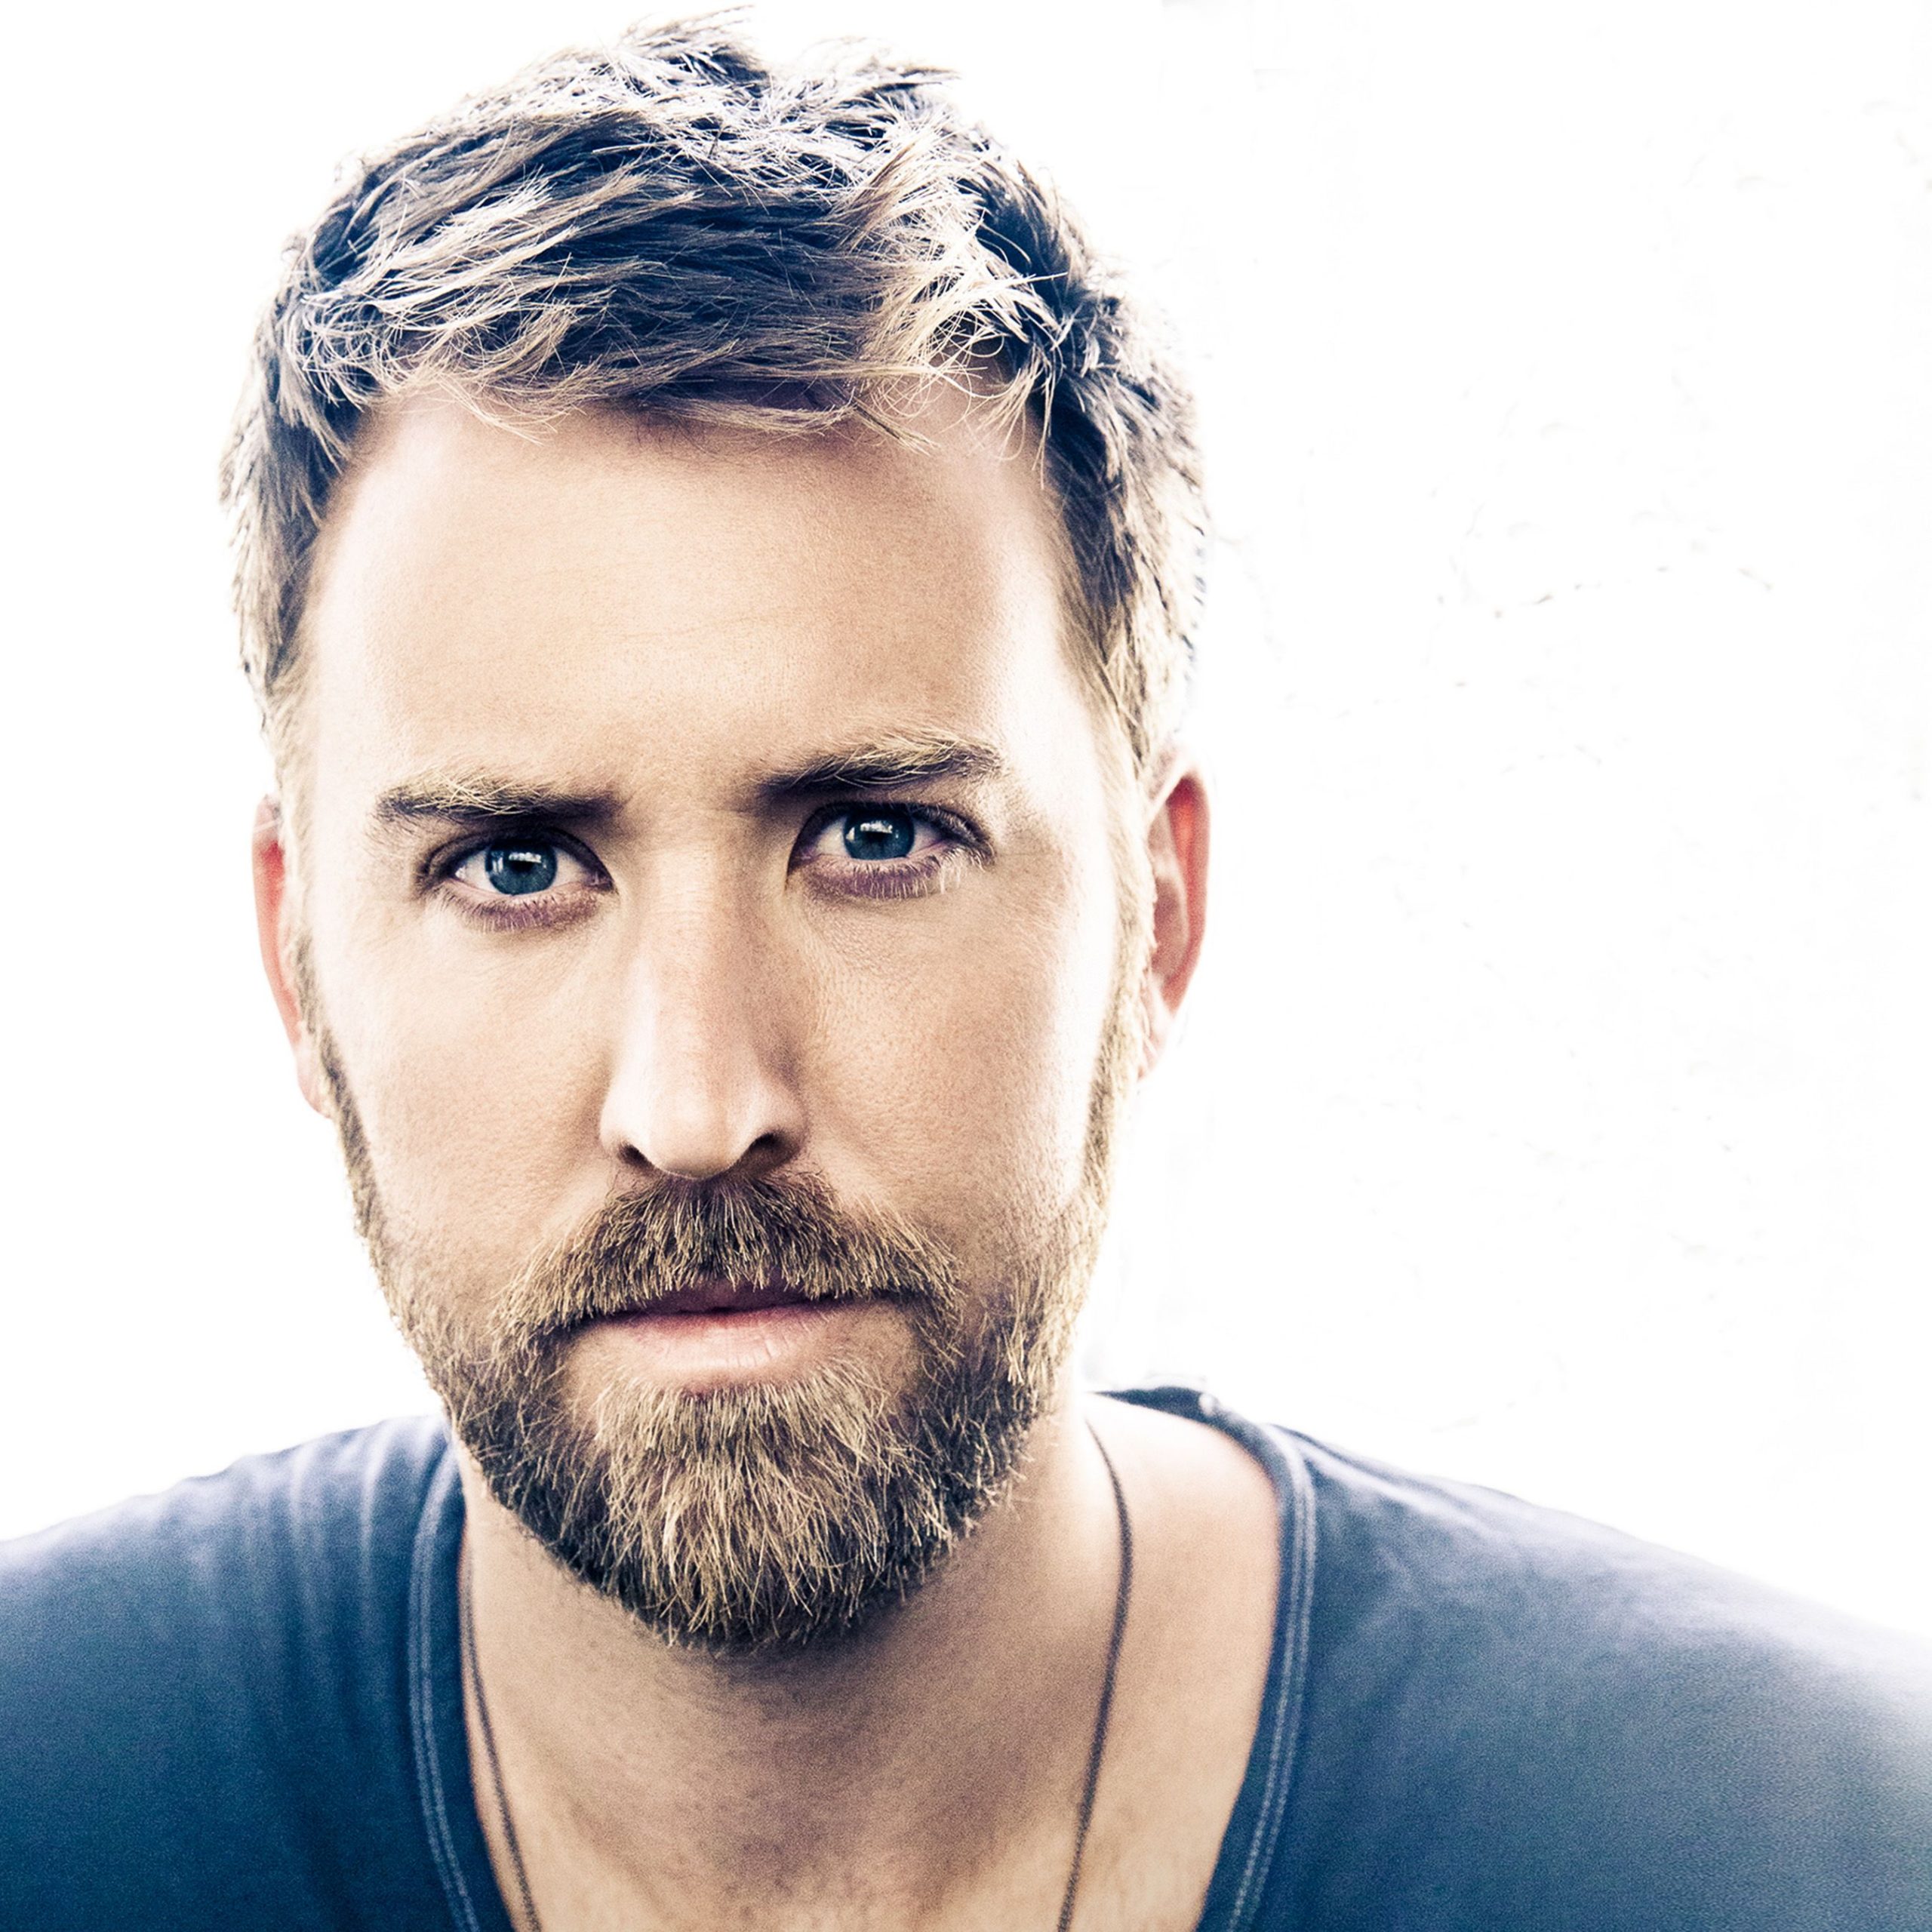 CHARLES KELLEY EARNS GRAMMY NOMINATION FOR “THE DRIVER”